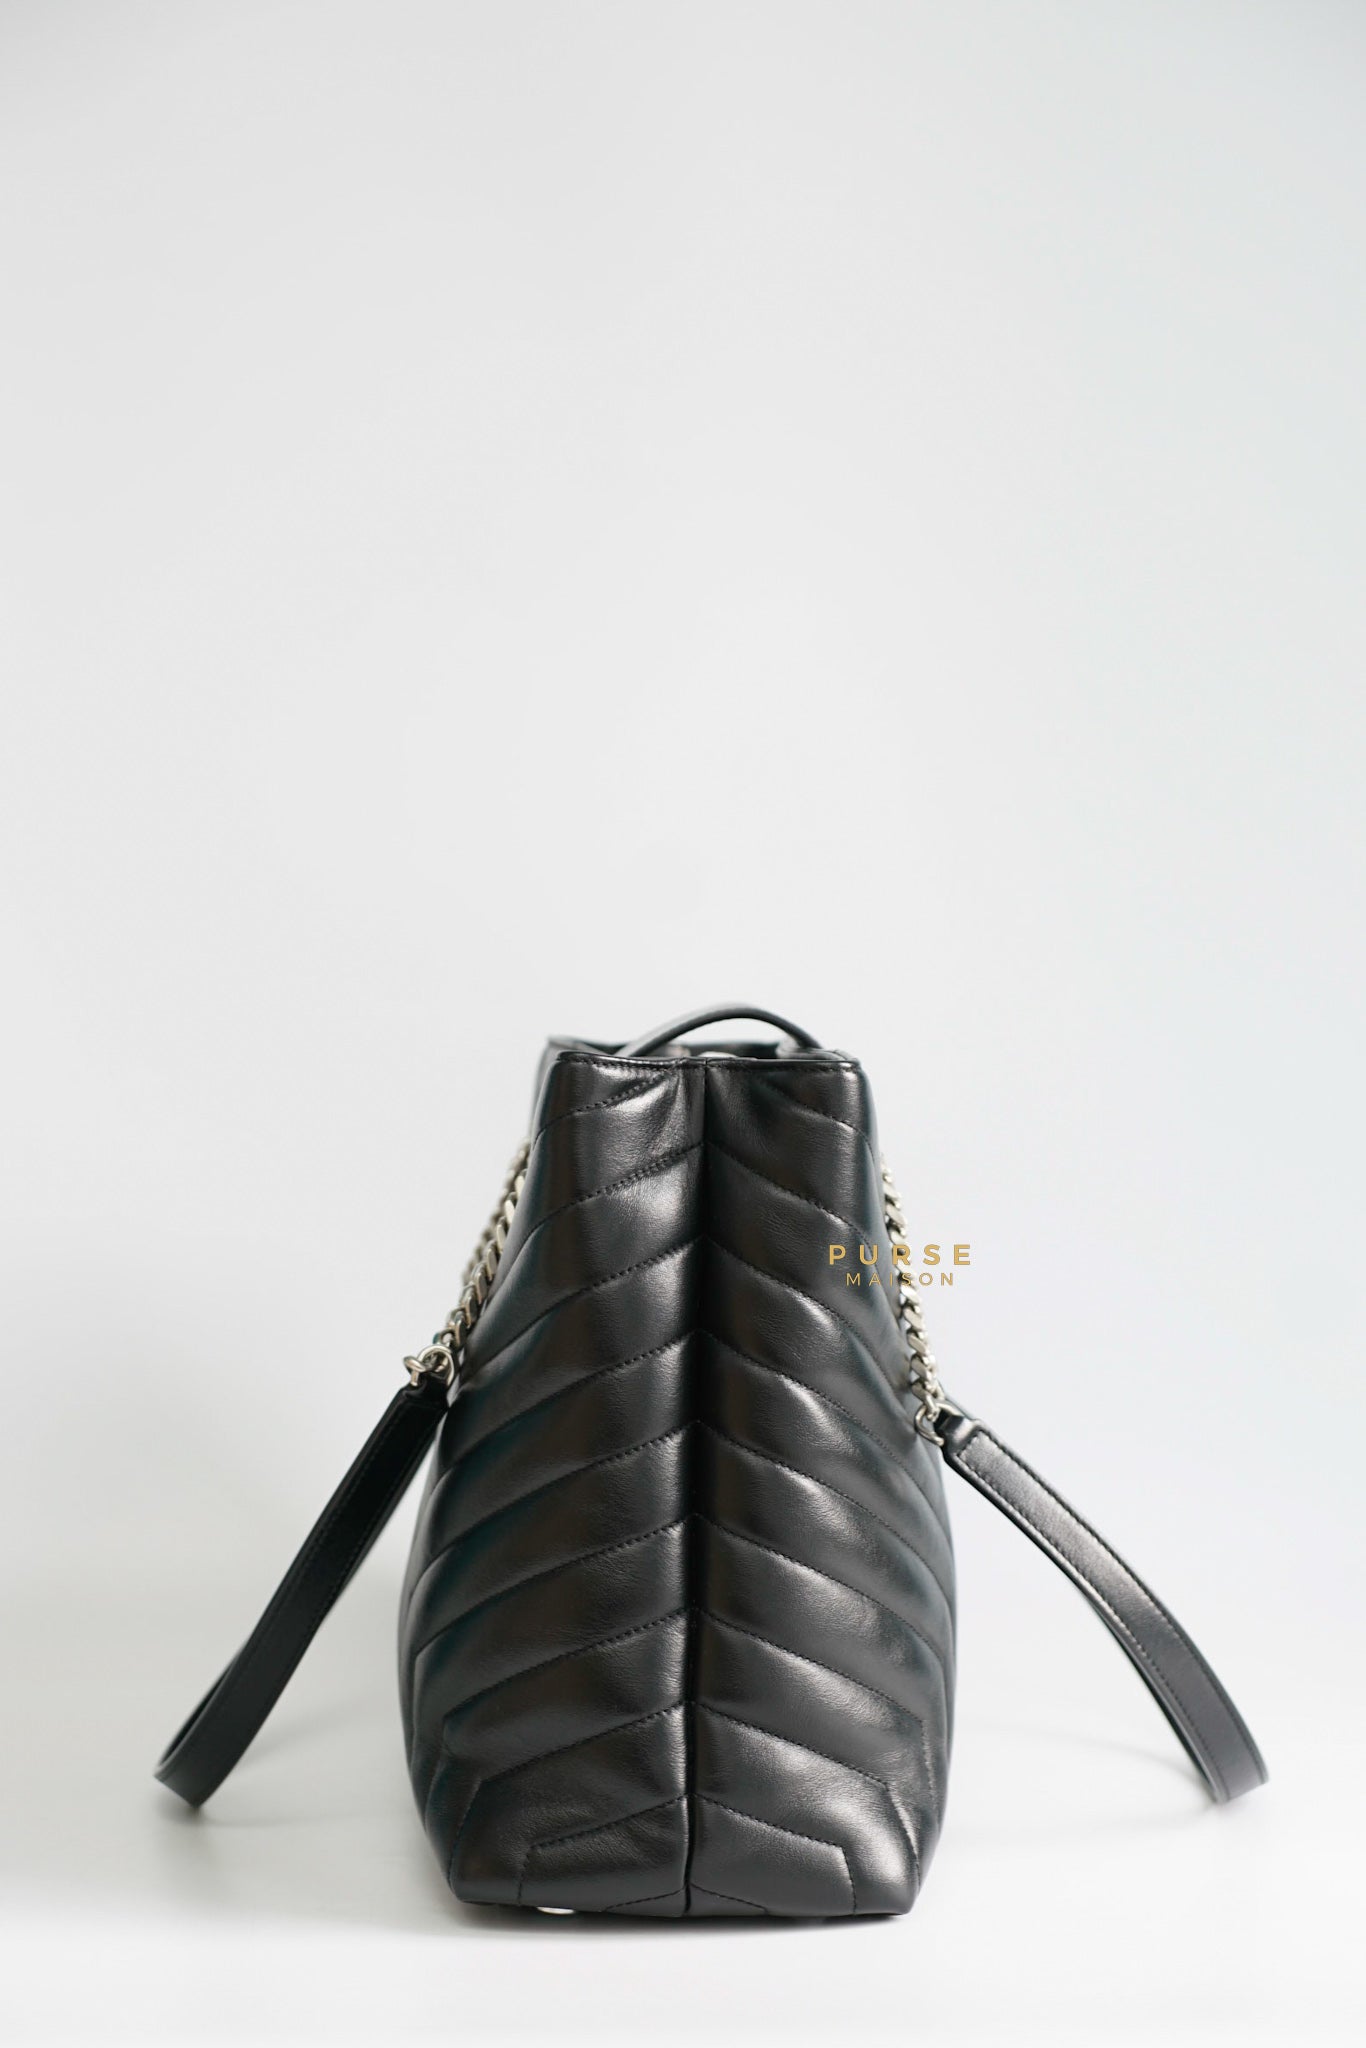 YSL Loulou Large Tote Bag in Black Quilted Y Leather and Silver Hardware